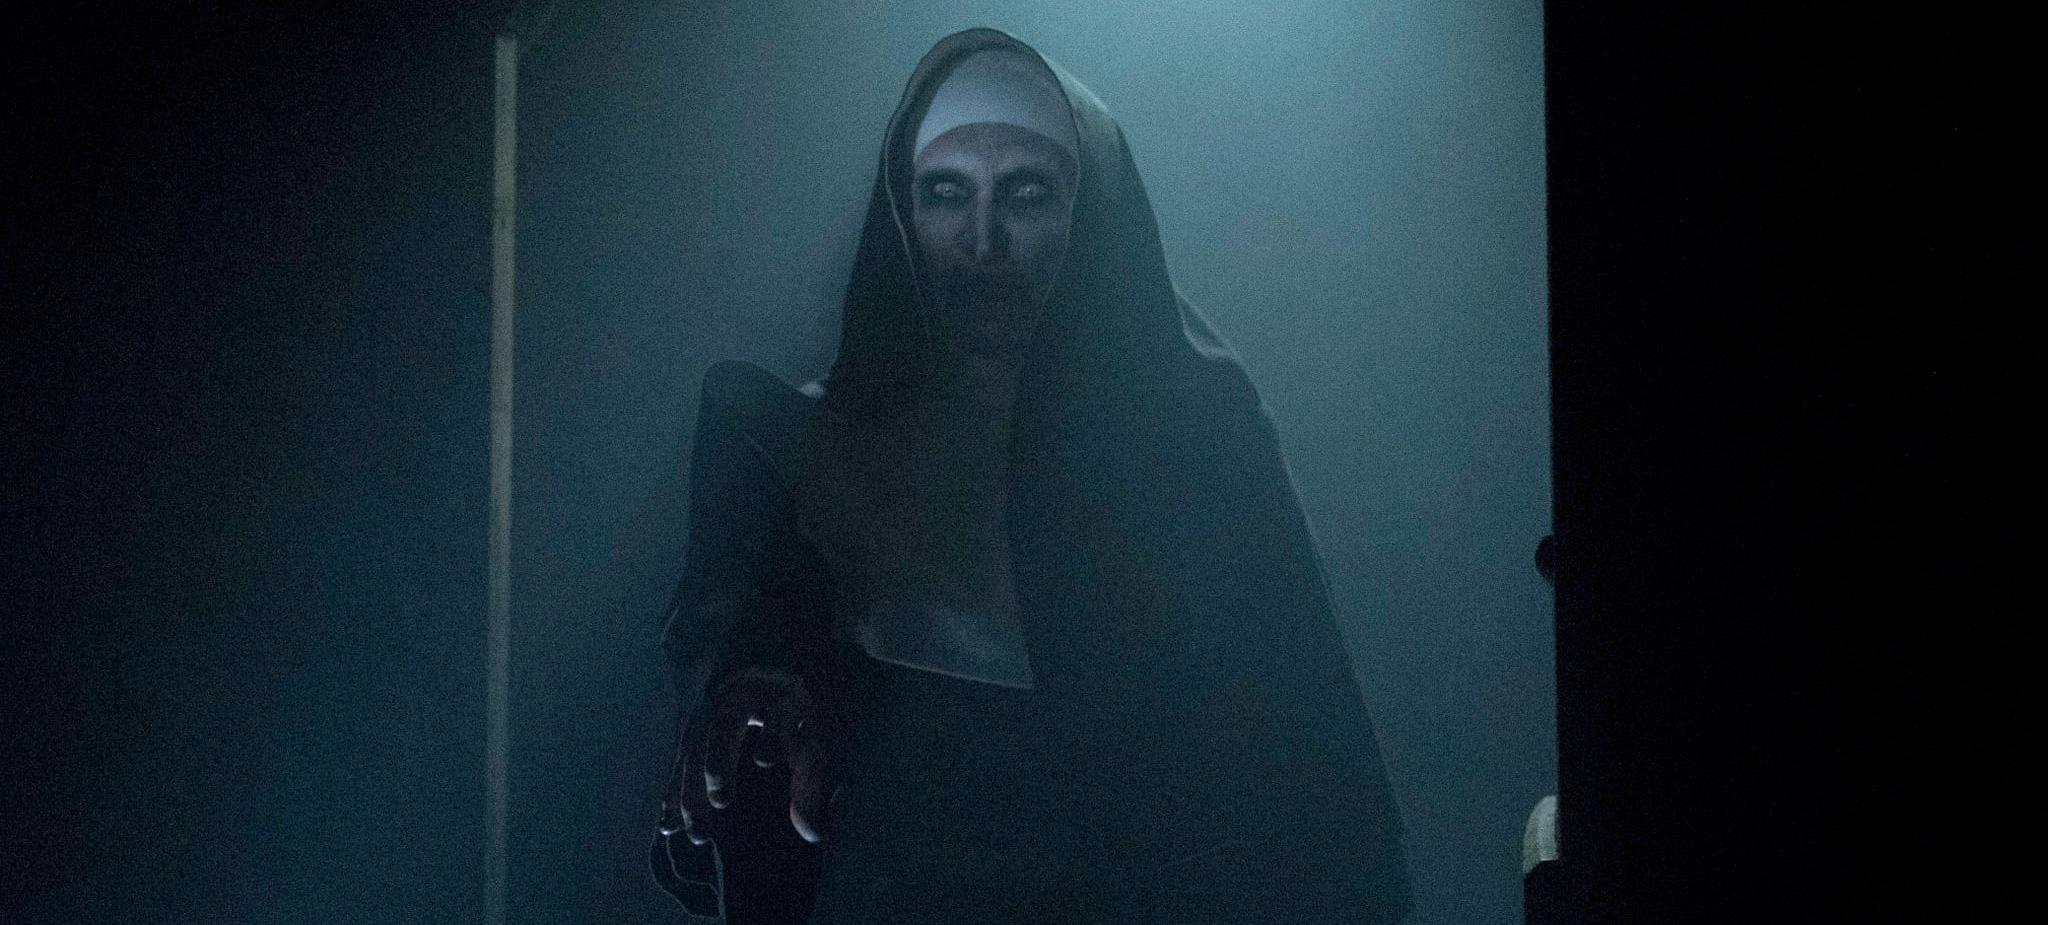 The Nun Reviews: A Weak Entry in 'The Conjuring' Universe /Film